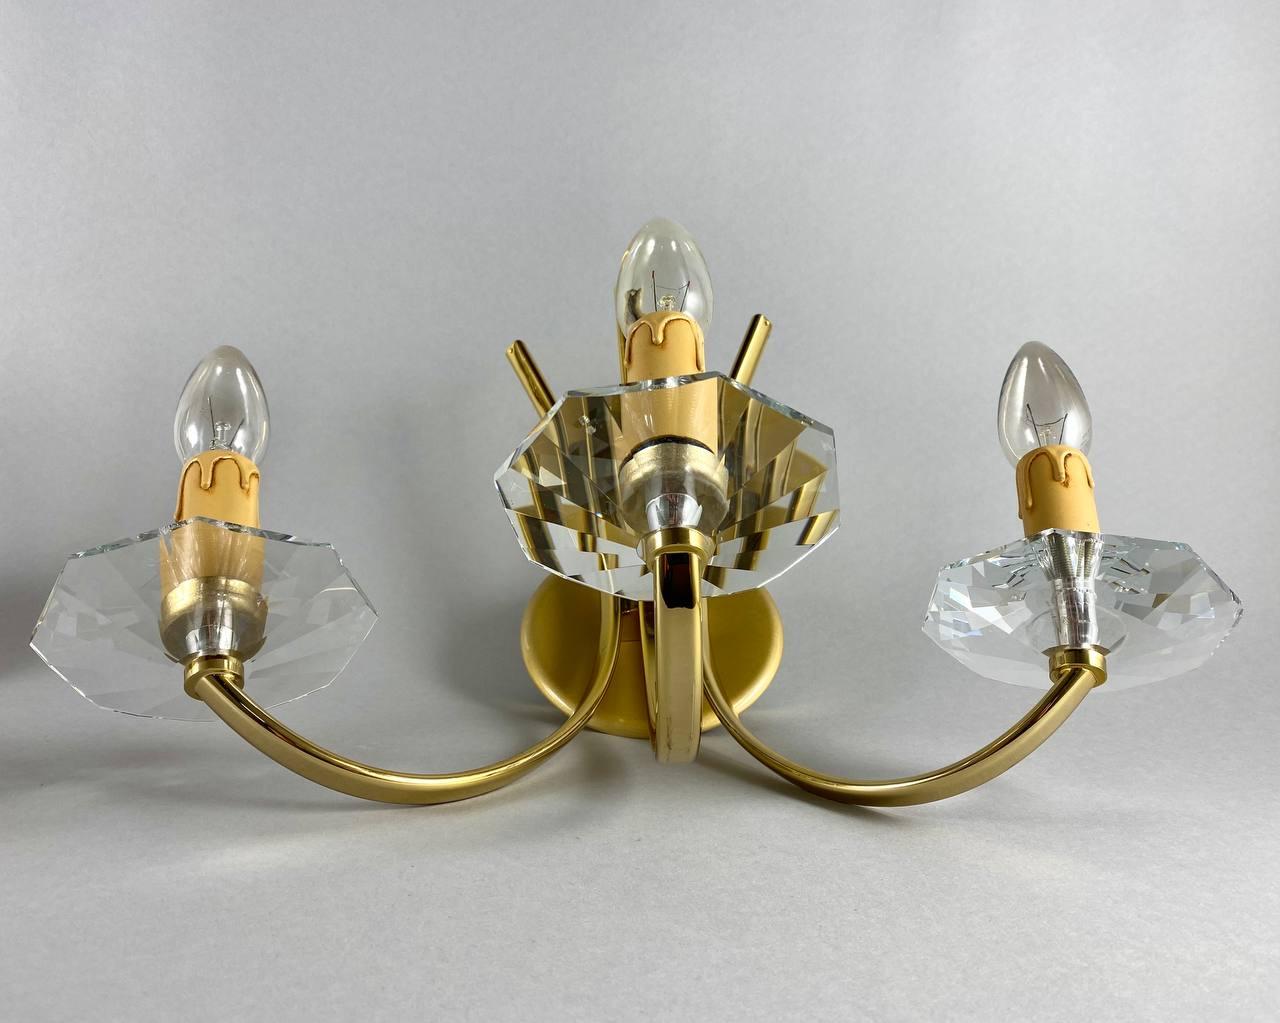 Classic designer sconces in gilt brass with three horns (candles) with crystal bobeche from the famous Portuguese company Candeeiros Castro.

Vintage designer wall lighting with 3 horns.

Very noble and sensual! Such a wall lamps will